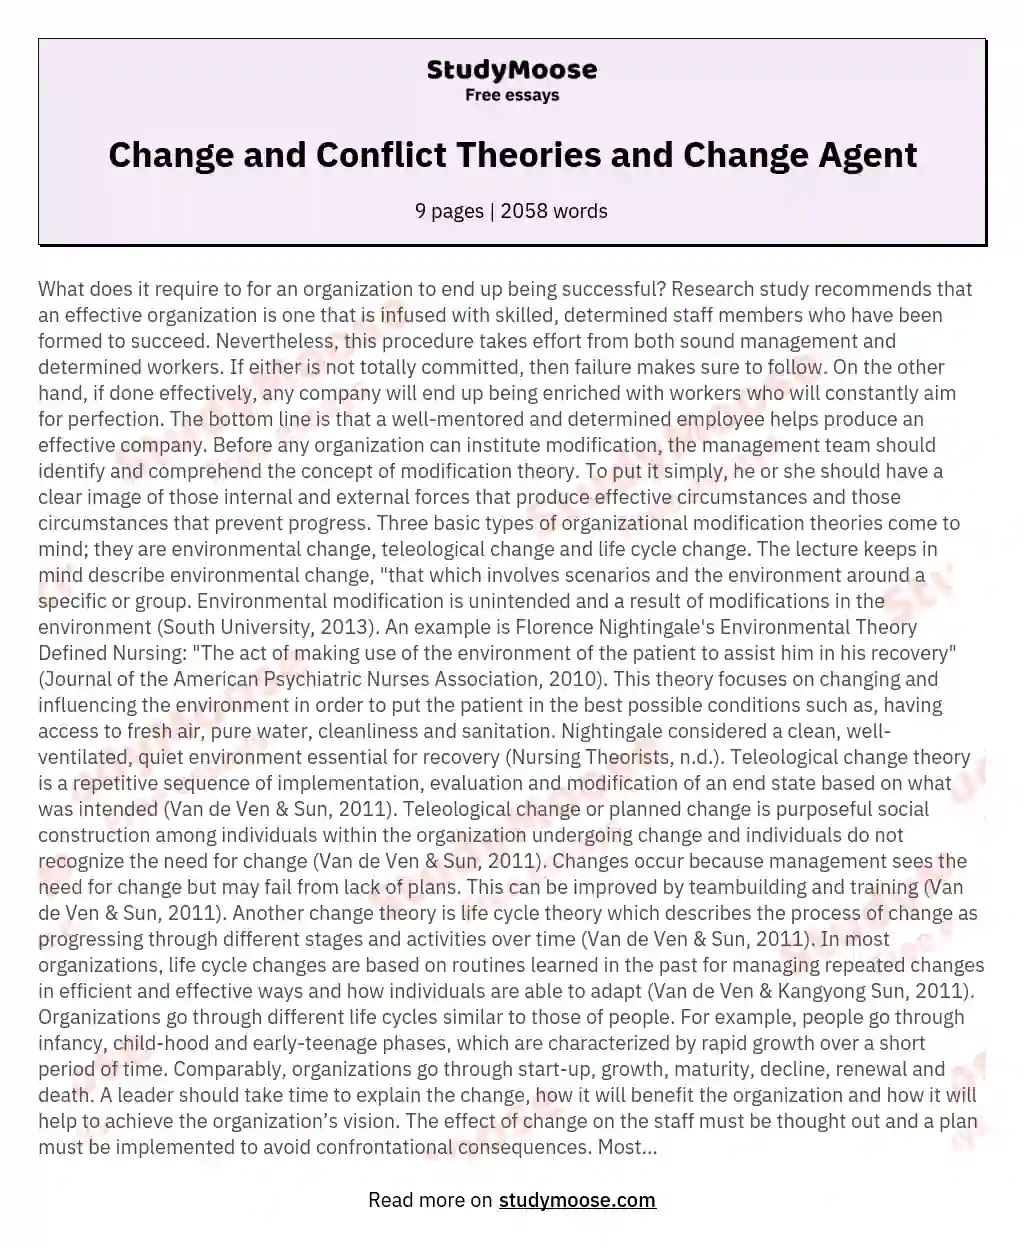 Change and Conflict Theories and Change Agent essay